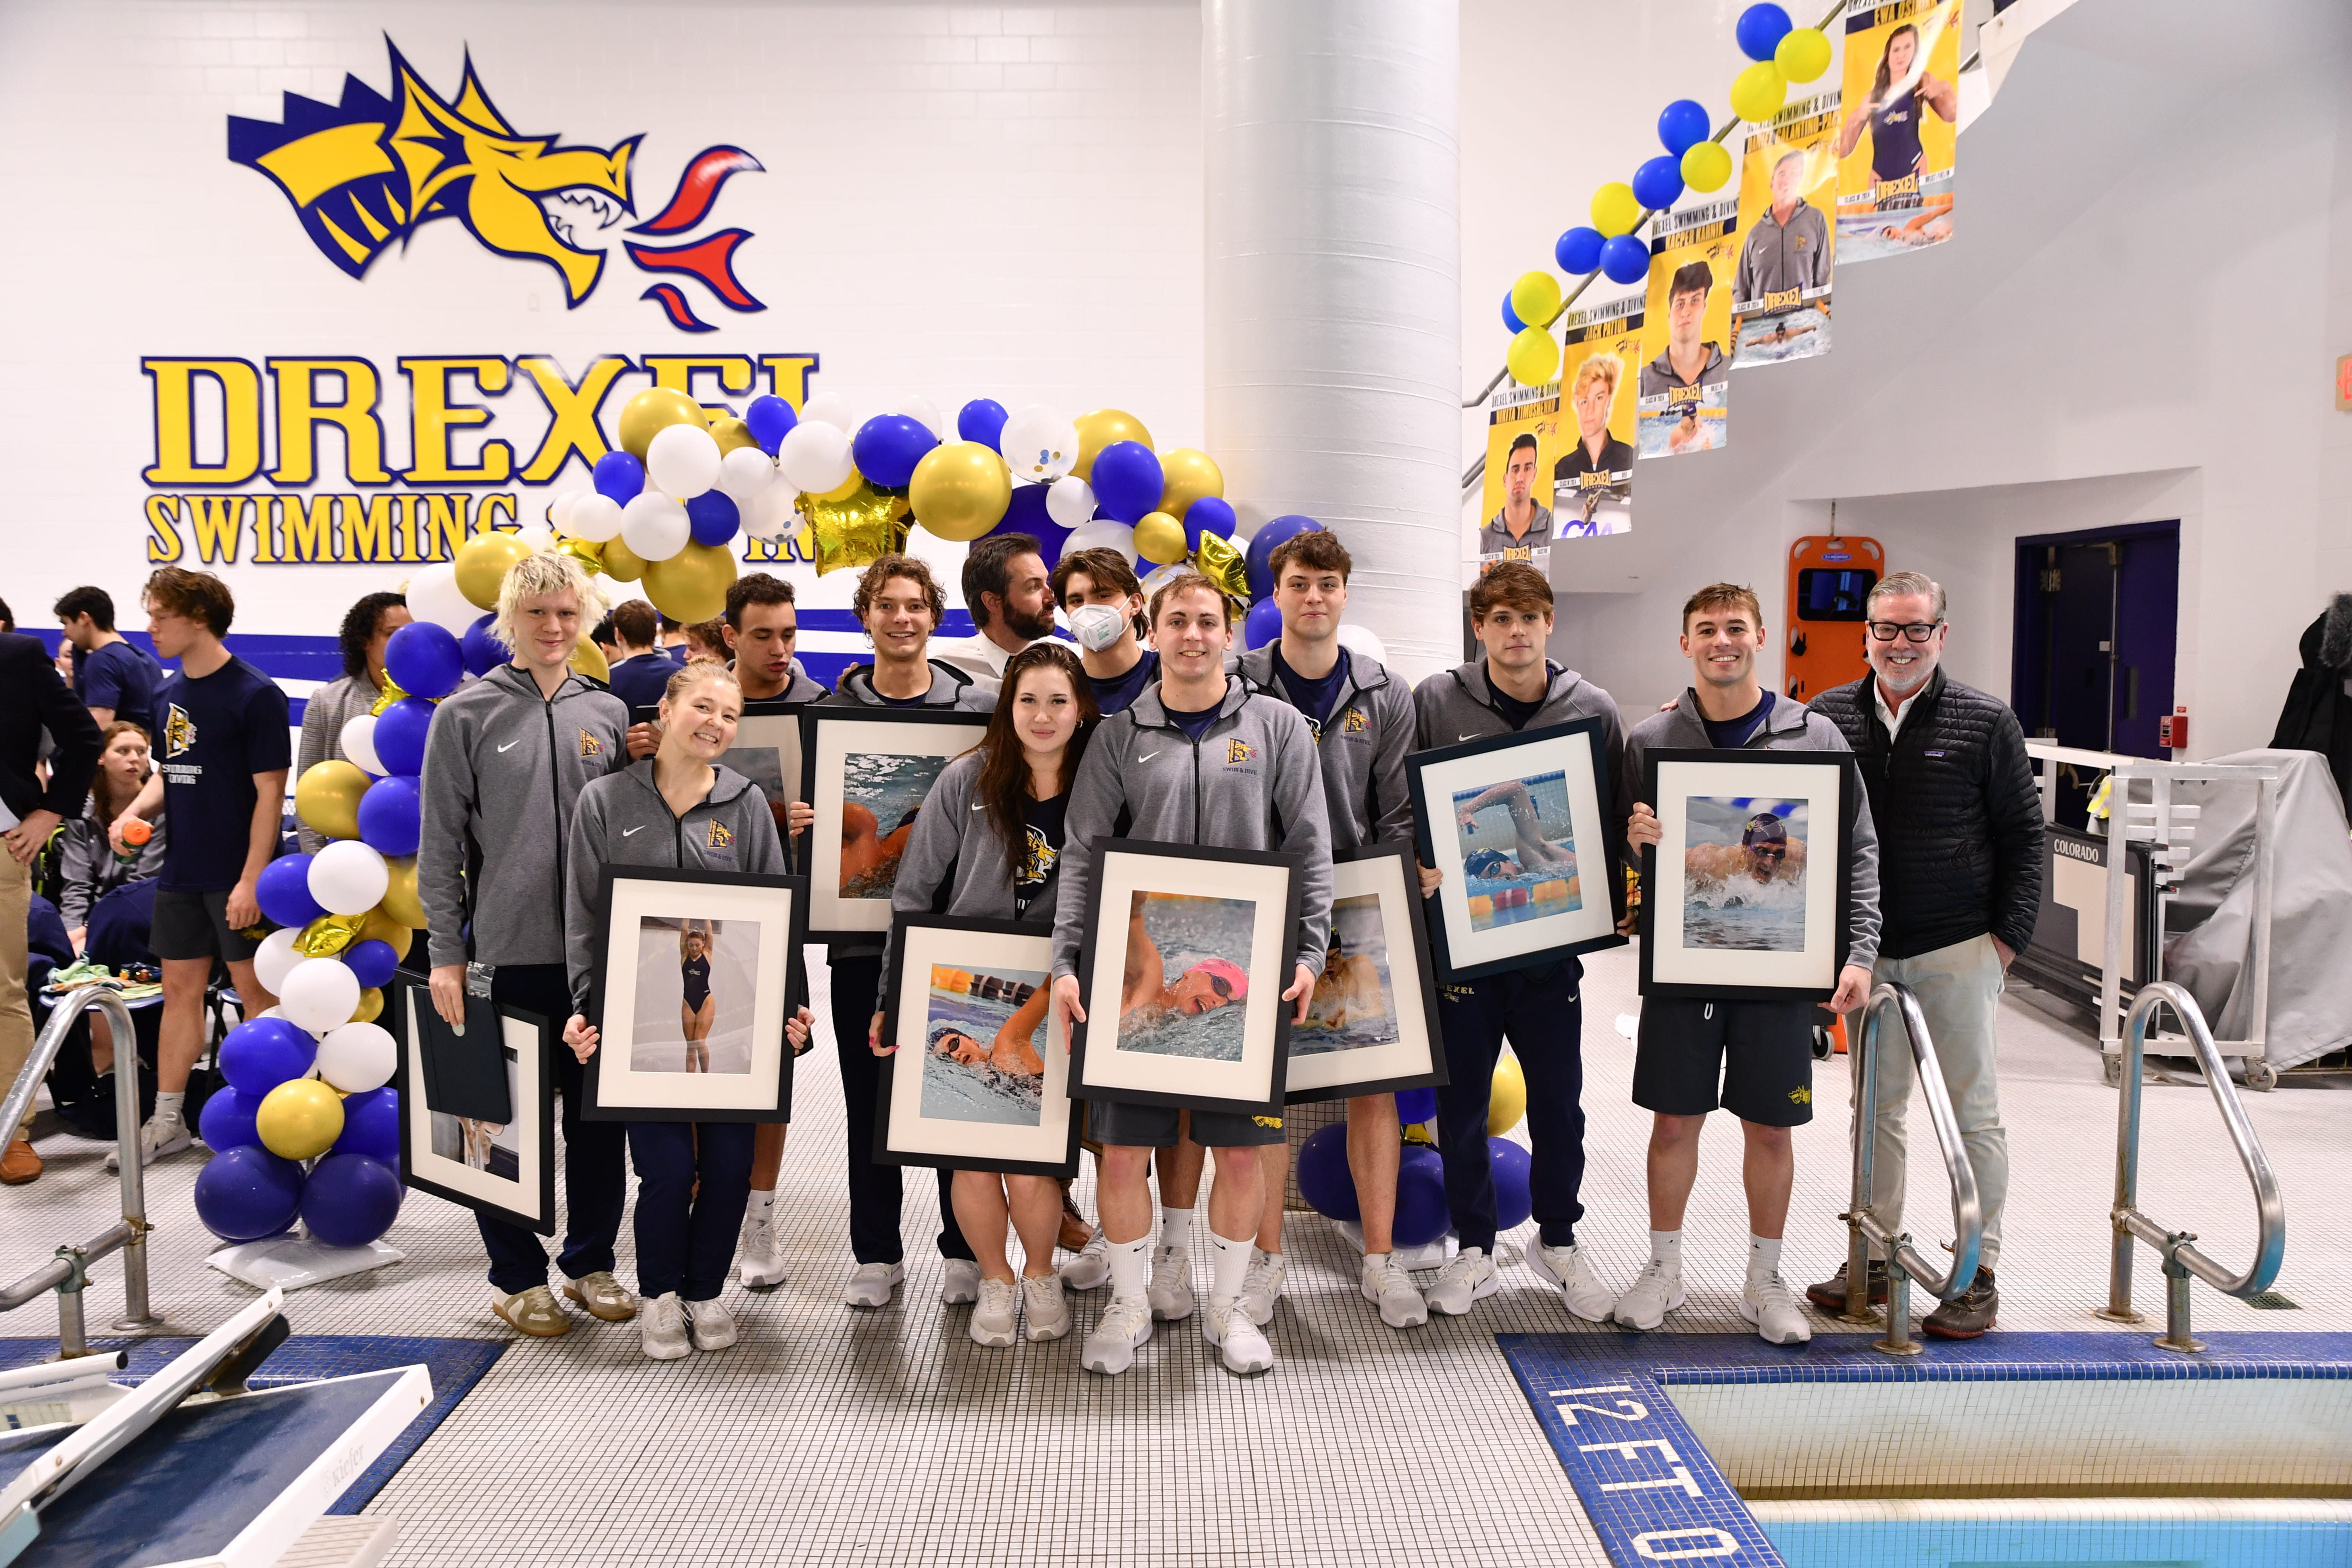 President John Fry standing next to members of Swimming & Diving team in gymnasium. Each team member is holding a framed picture of themselves competing.